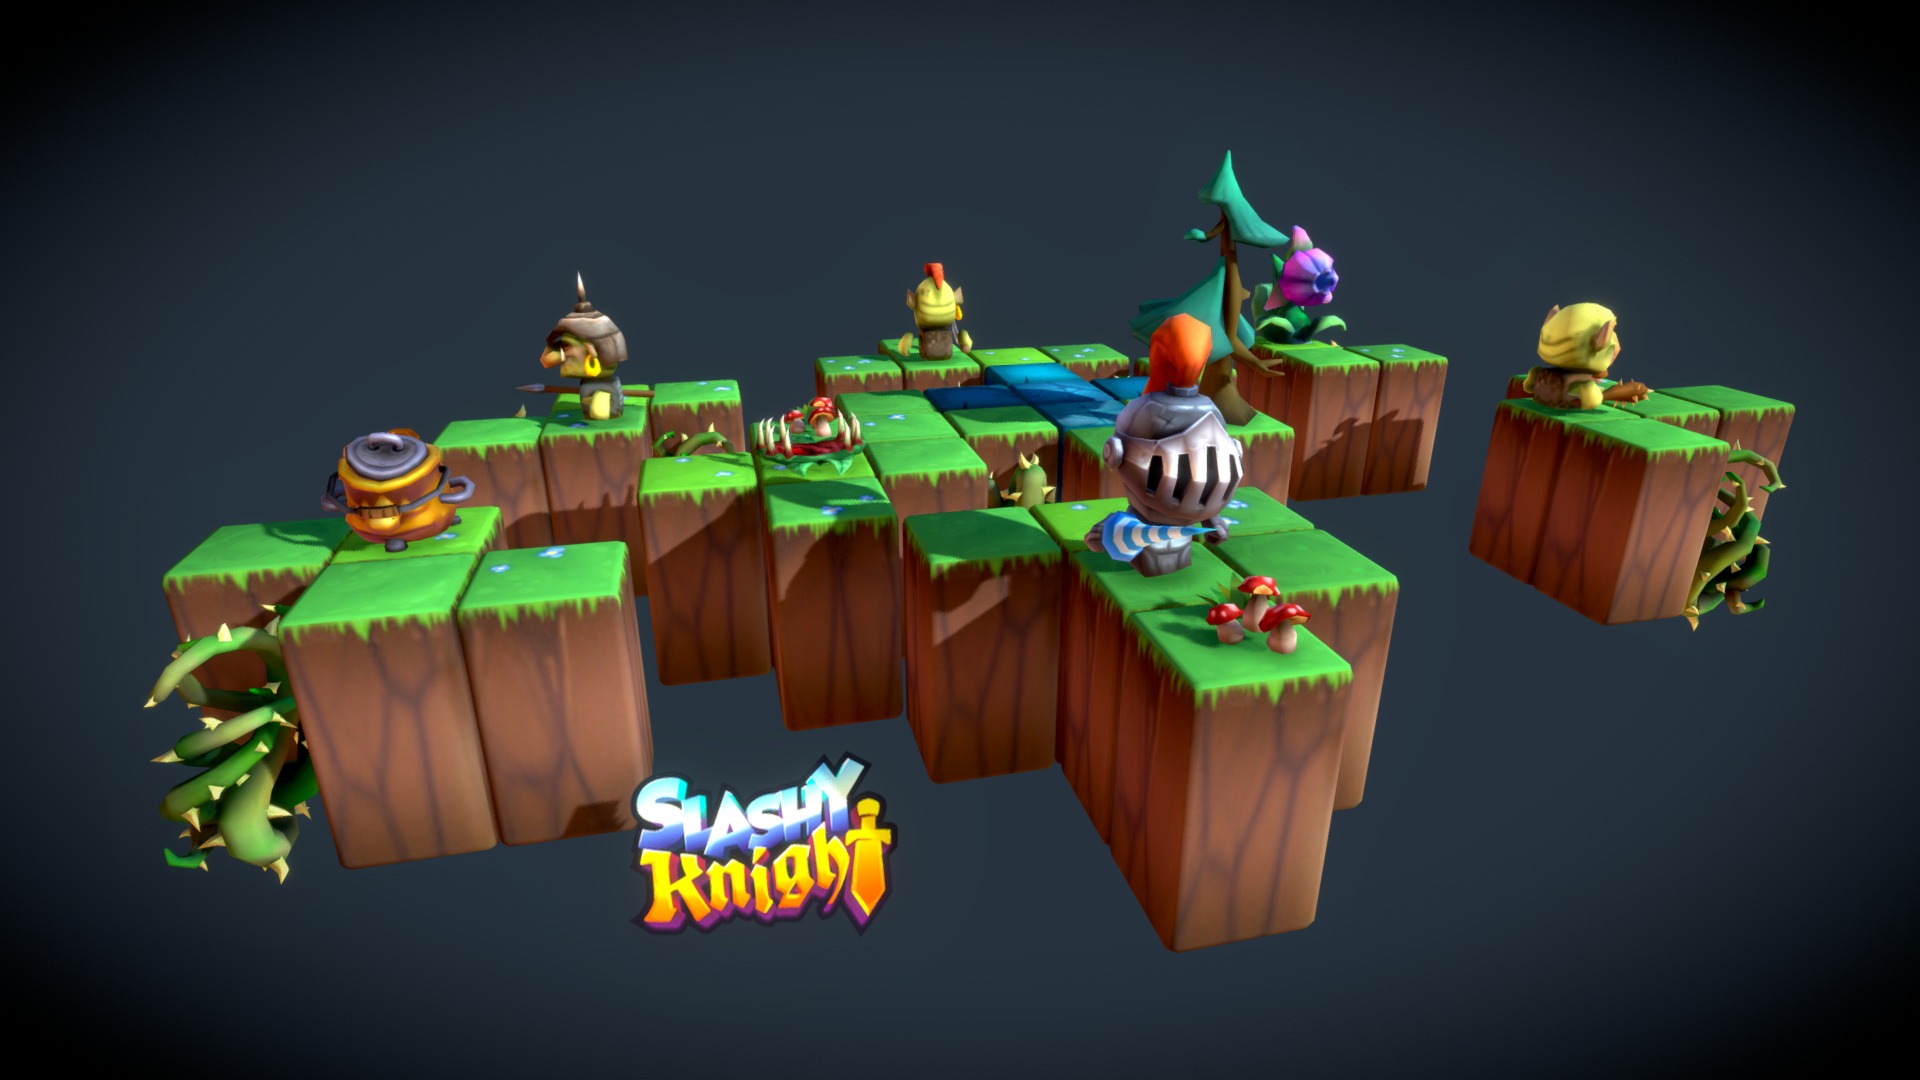 Diorama showcasing animations I have made for Orbital Knight's mobile game - Slashy Knight, due to release july 19th.

Logo, character models and amazing score were made by Krzysztof Oloś

You can learn more about the game on Orbital Knight website. You can play beta version on android - Slashy Knight - Characters - Animated Diorama - 3D model by arturhorn 3d model